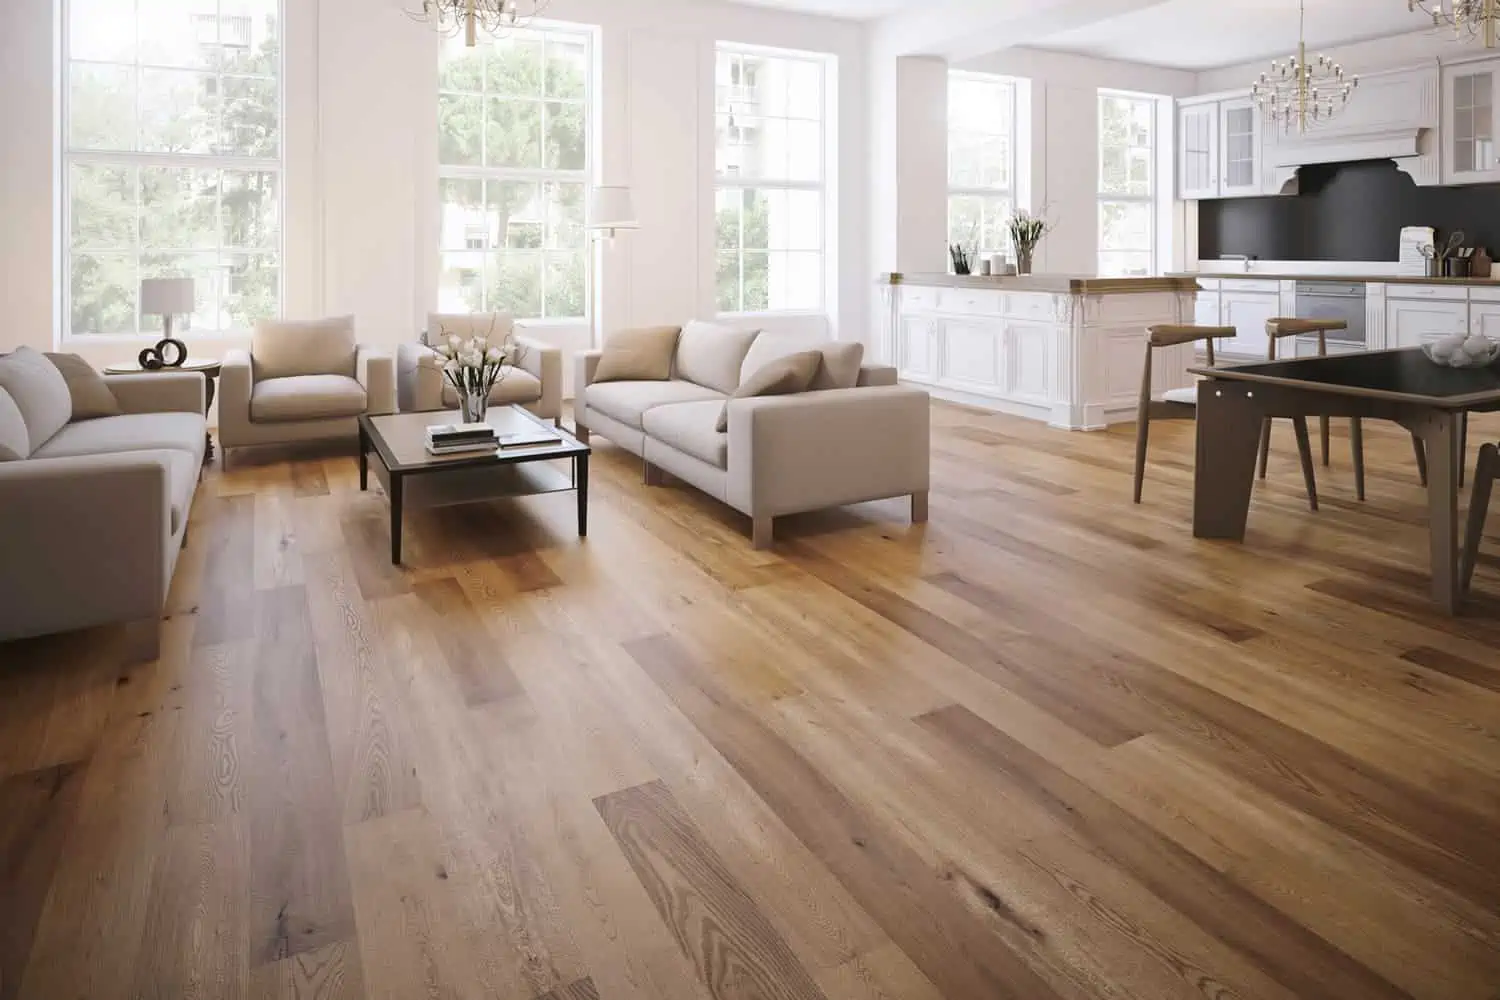 laminate wooden plank flooring in a minimalistic living room with beige sofa and dark brown wooden furniture